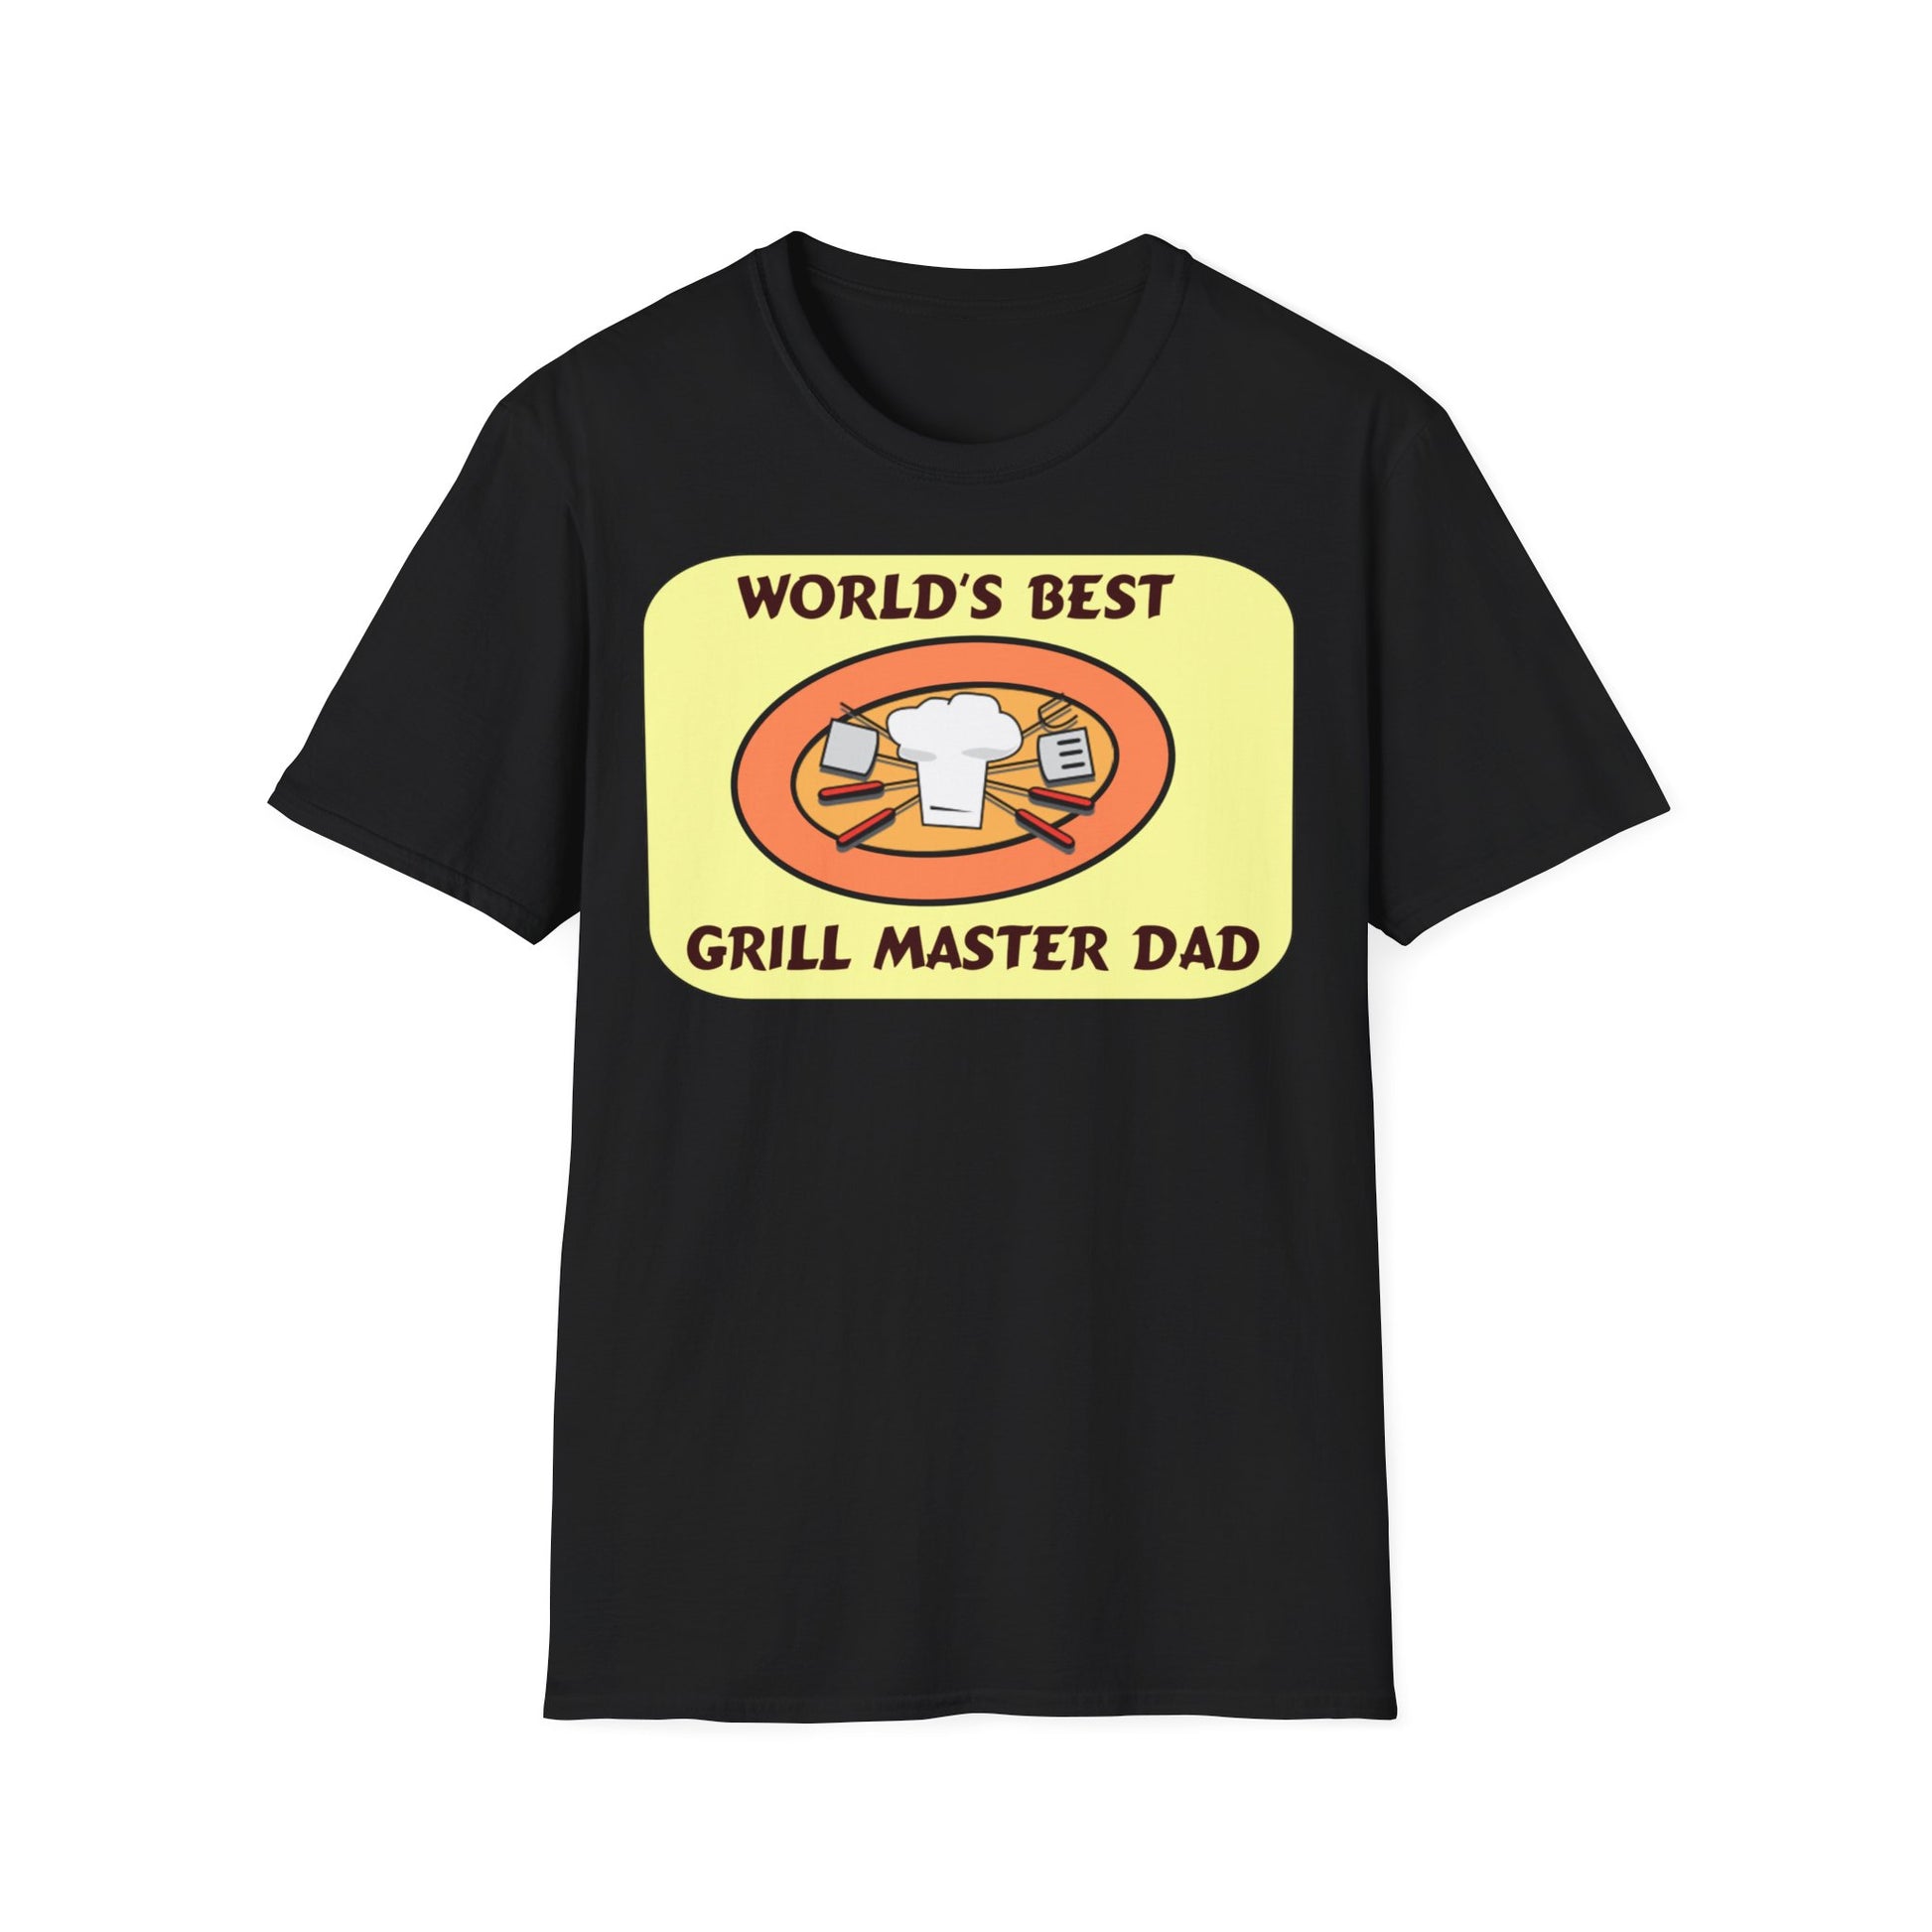 A black t-shirt with a design of BBQ tools and a chef's hat. World's Best Grill Master Dad surrounds the design.